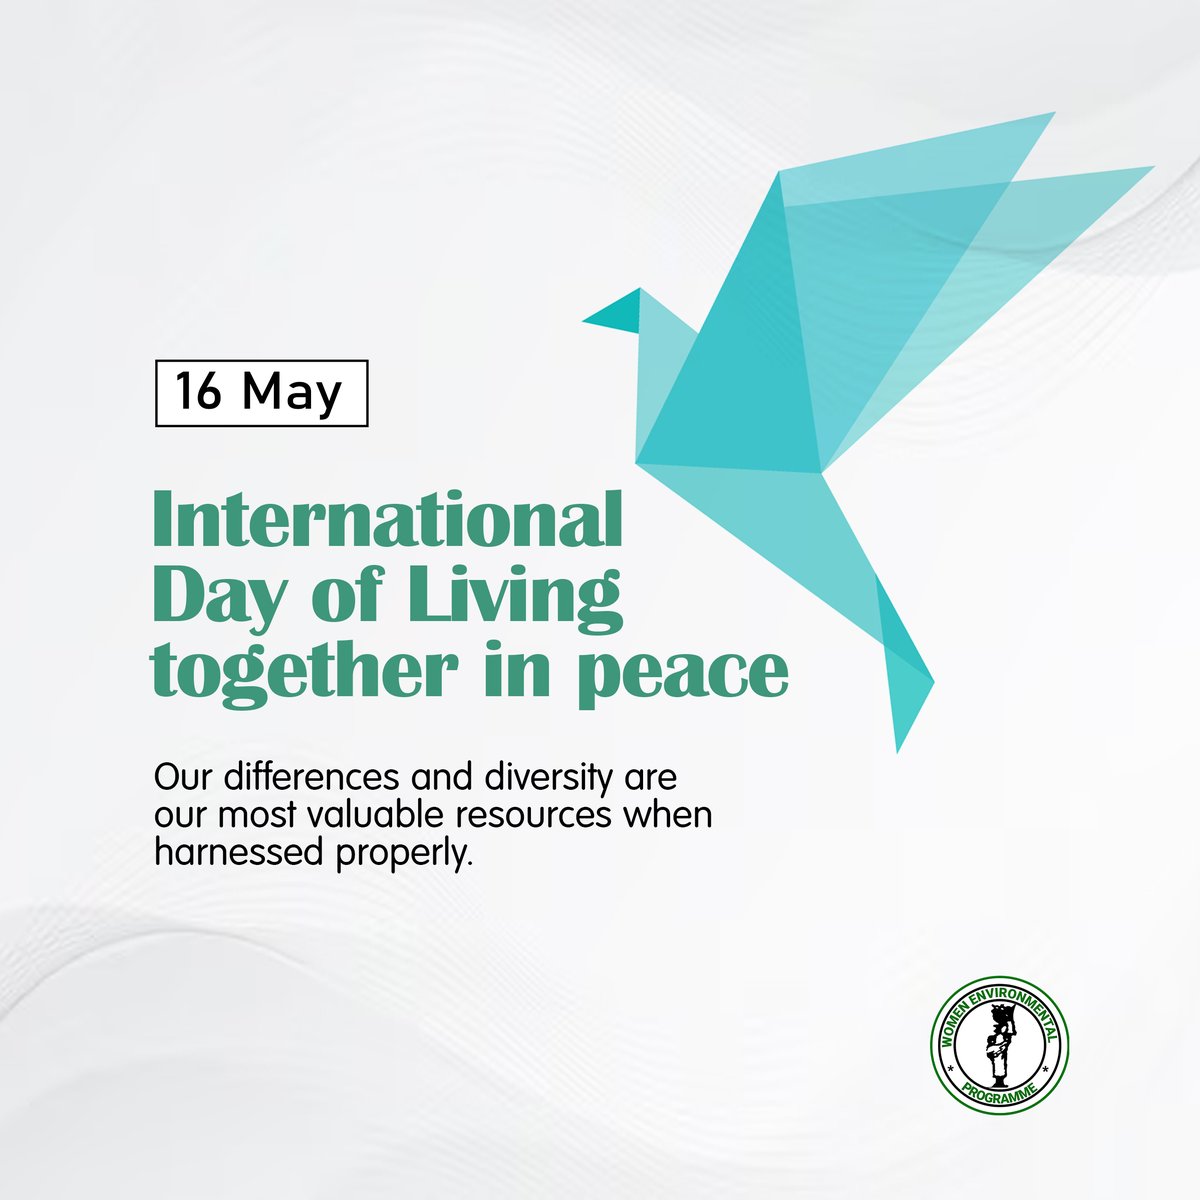 'Celebrating #InternationalDayOfLivingTogetherInPeace! 🌍✌️ Our differences and diversity are our most valuable resources when harnessed properly. Let us come together to harness the resource together. #LivingTogetherInPeace #UnitedinDifferenceandDiversity